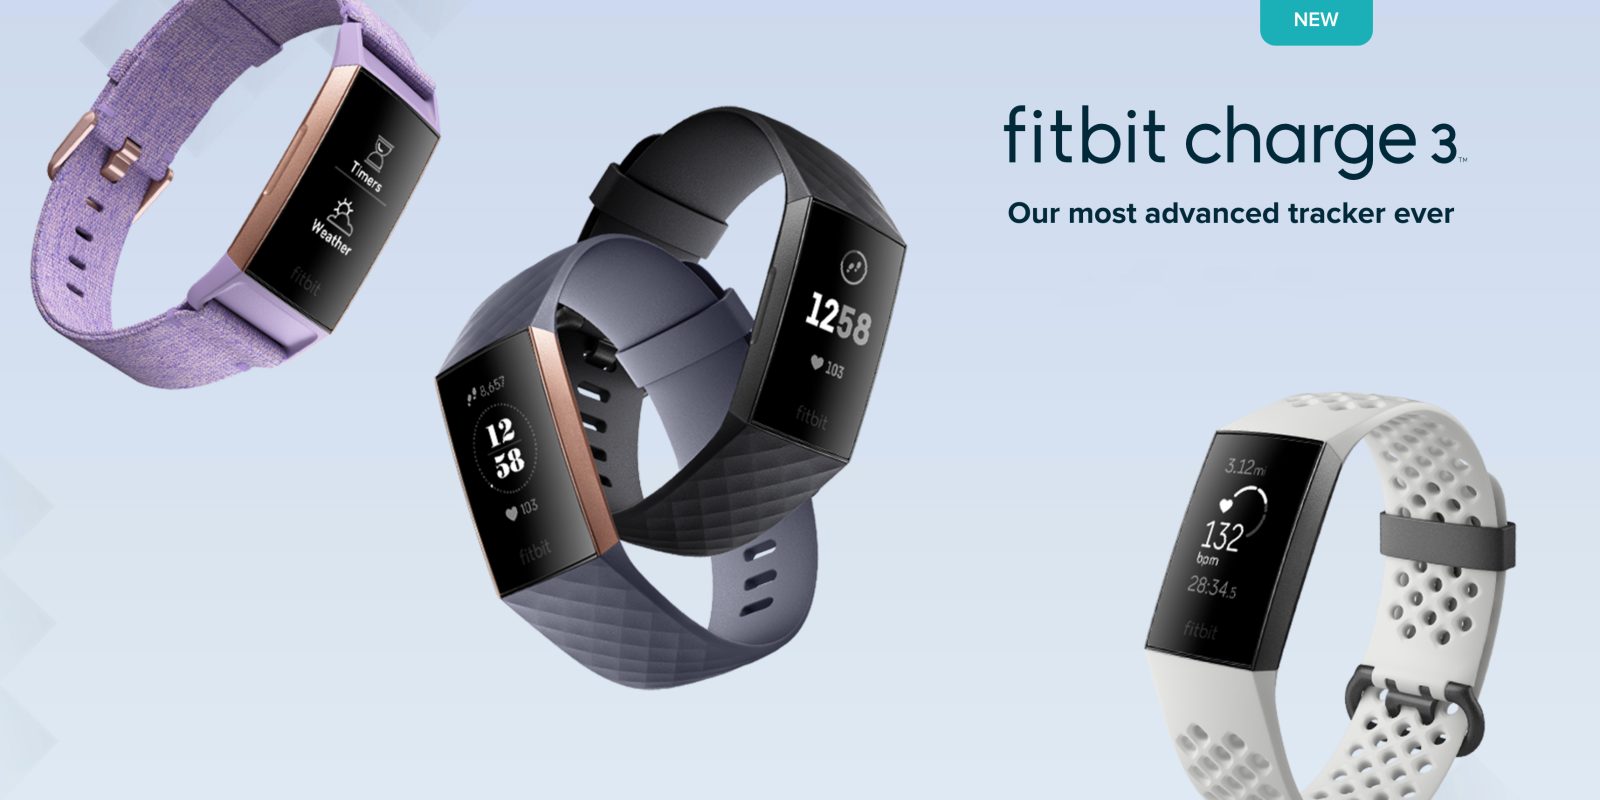 fitbit charge 3 retail price